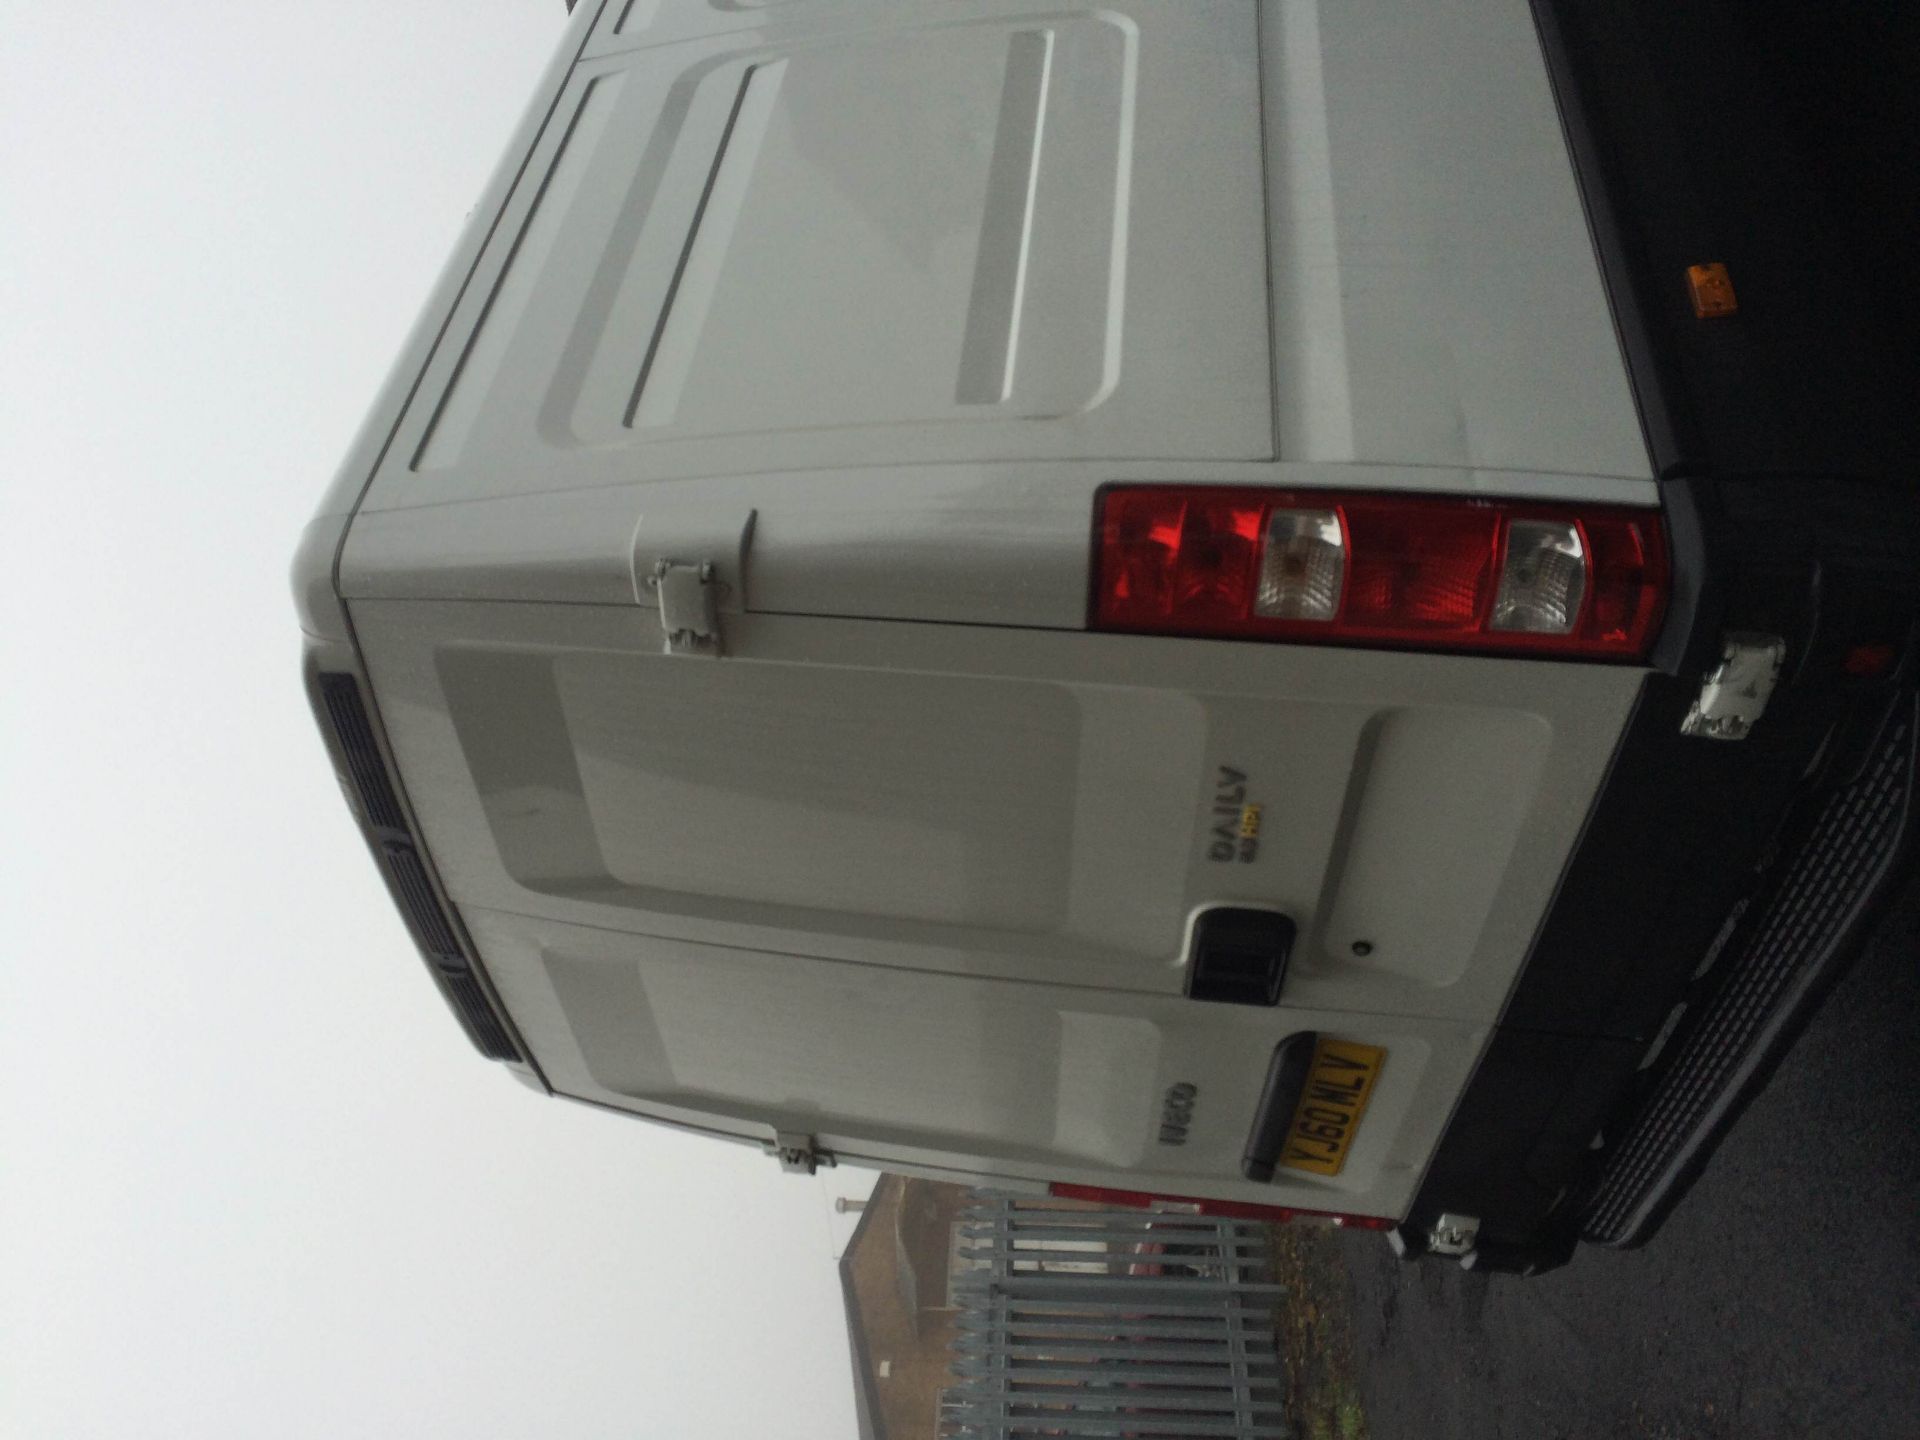 2011/60 REG IVECO DAILY 35S11 LWB EURO 4 NEW SHAPE - Image 5 of 9